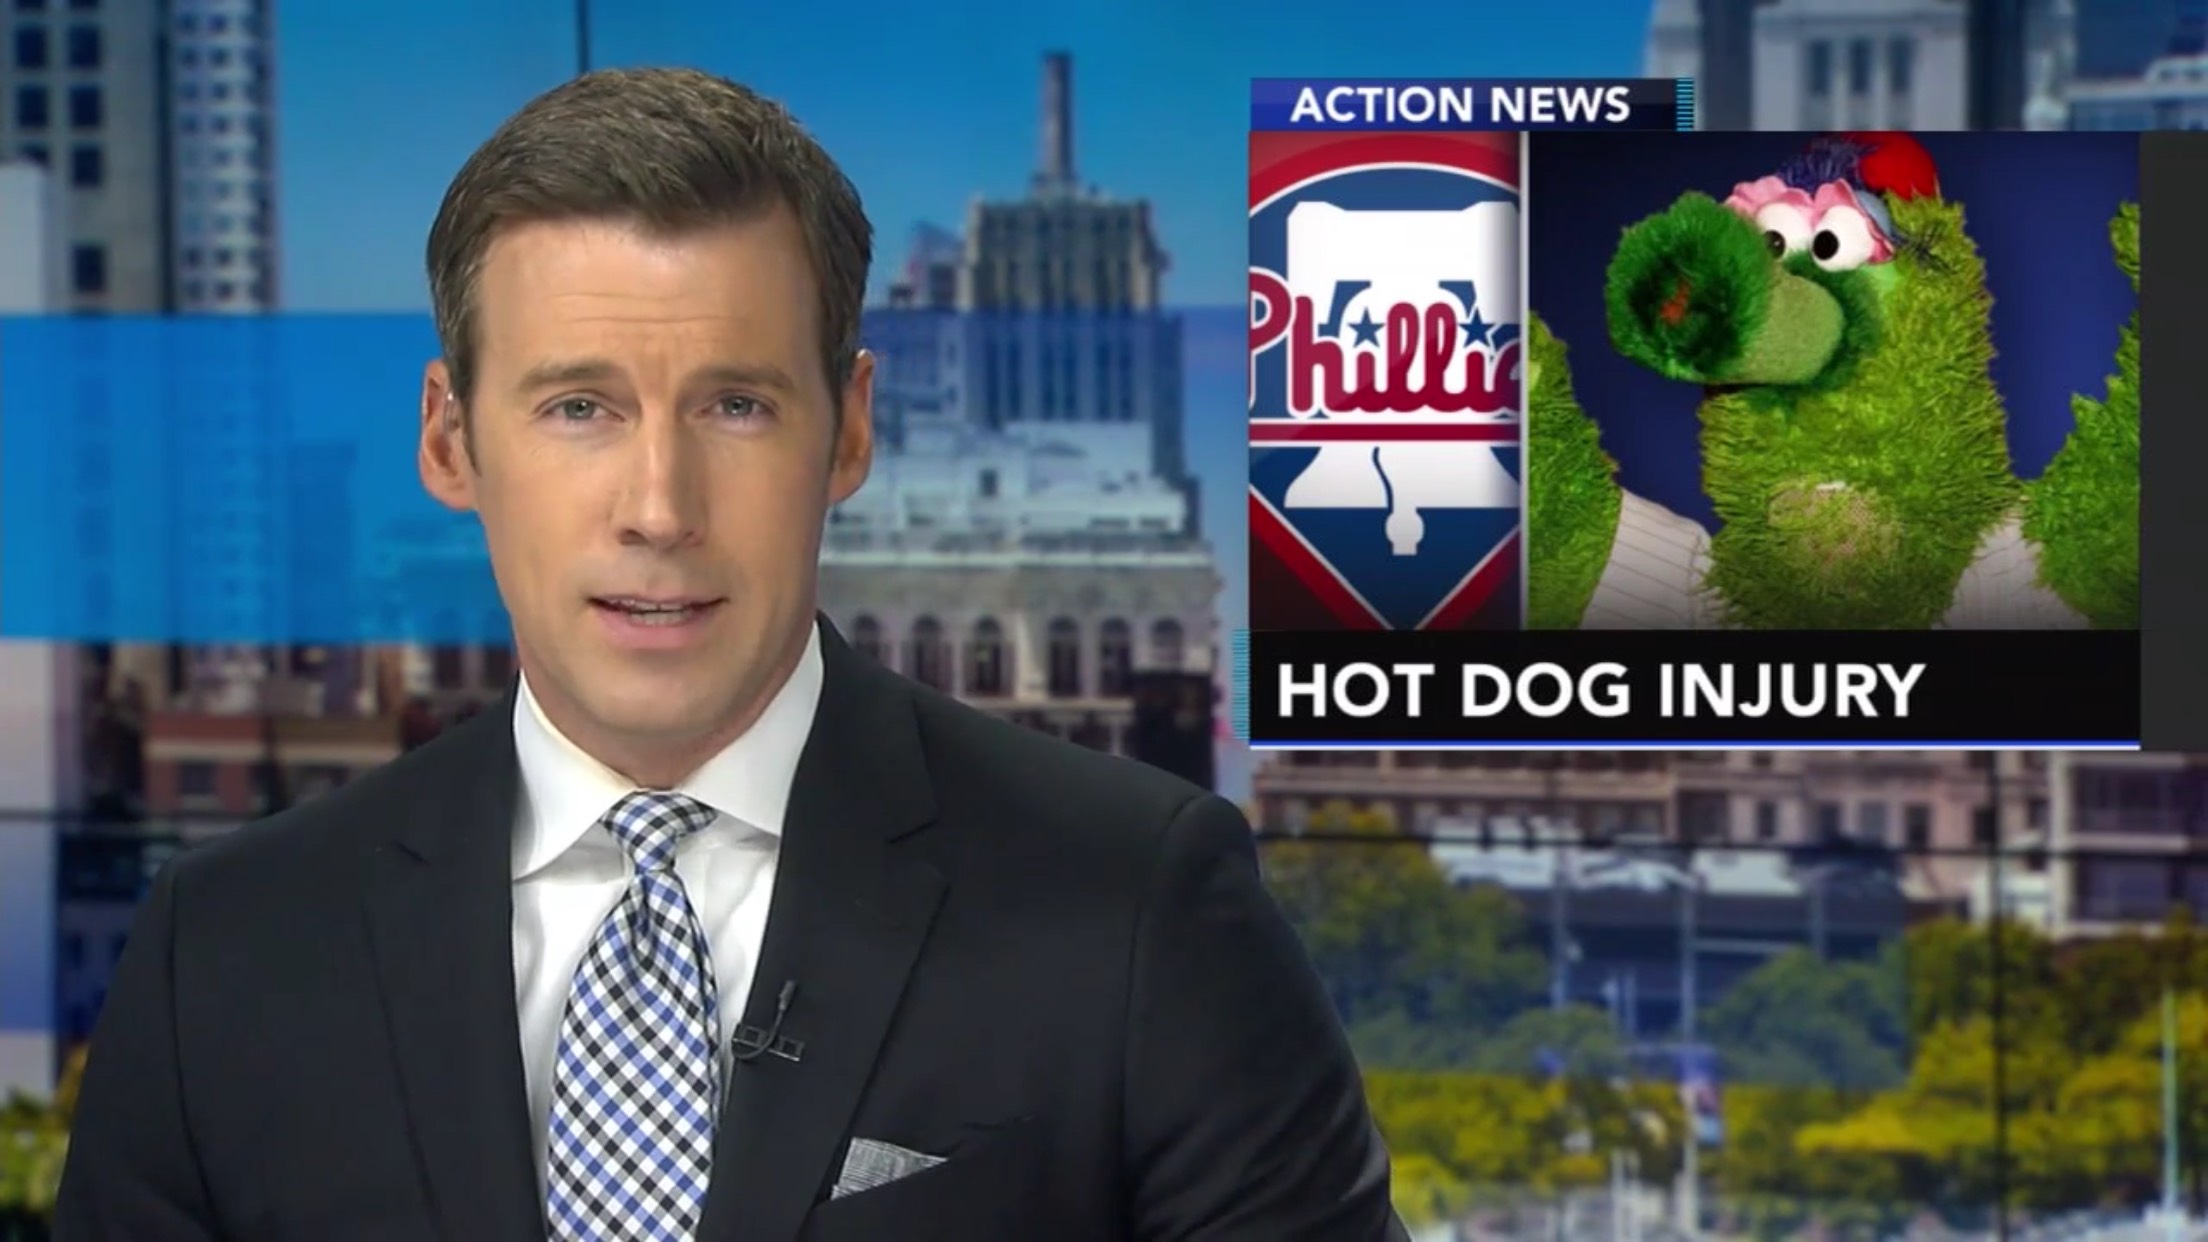 Philly Phanatic on local news with the caption "Hot Dog Injury"